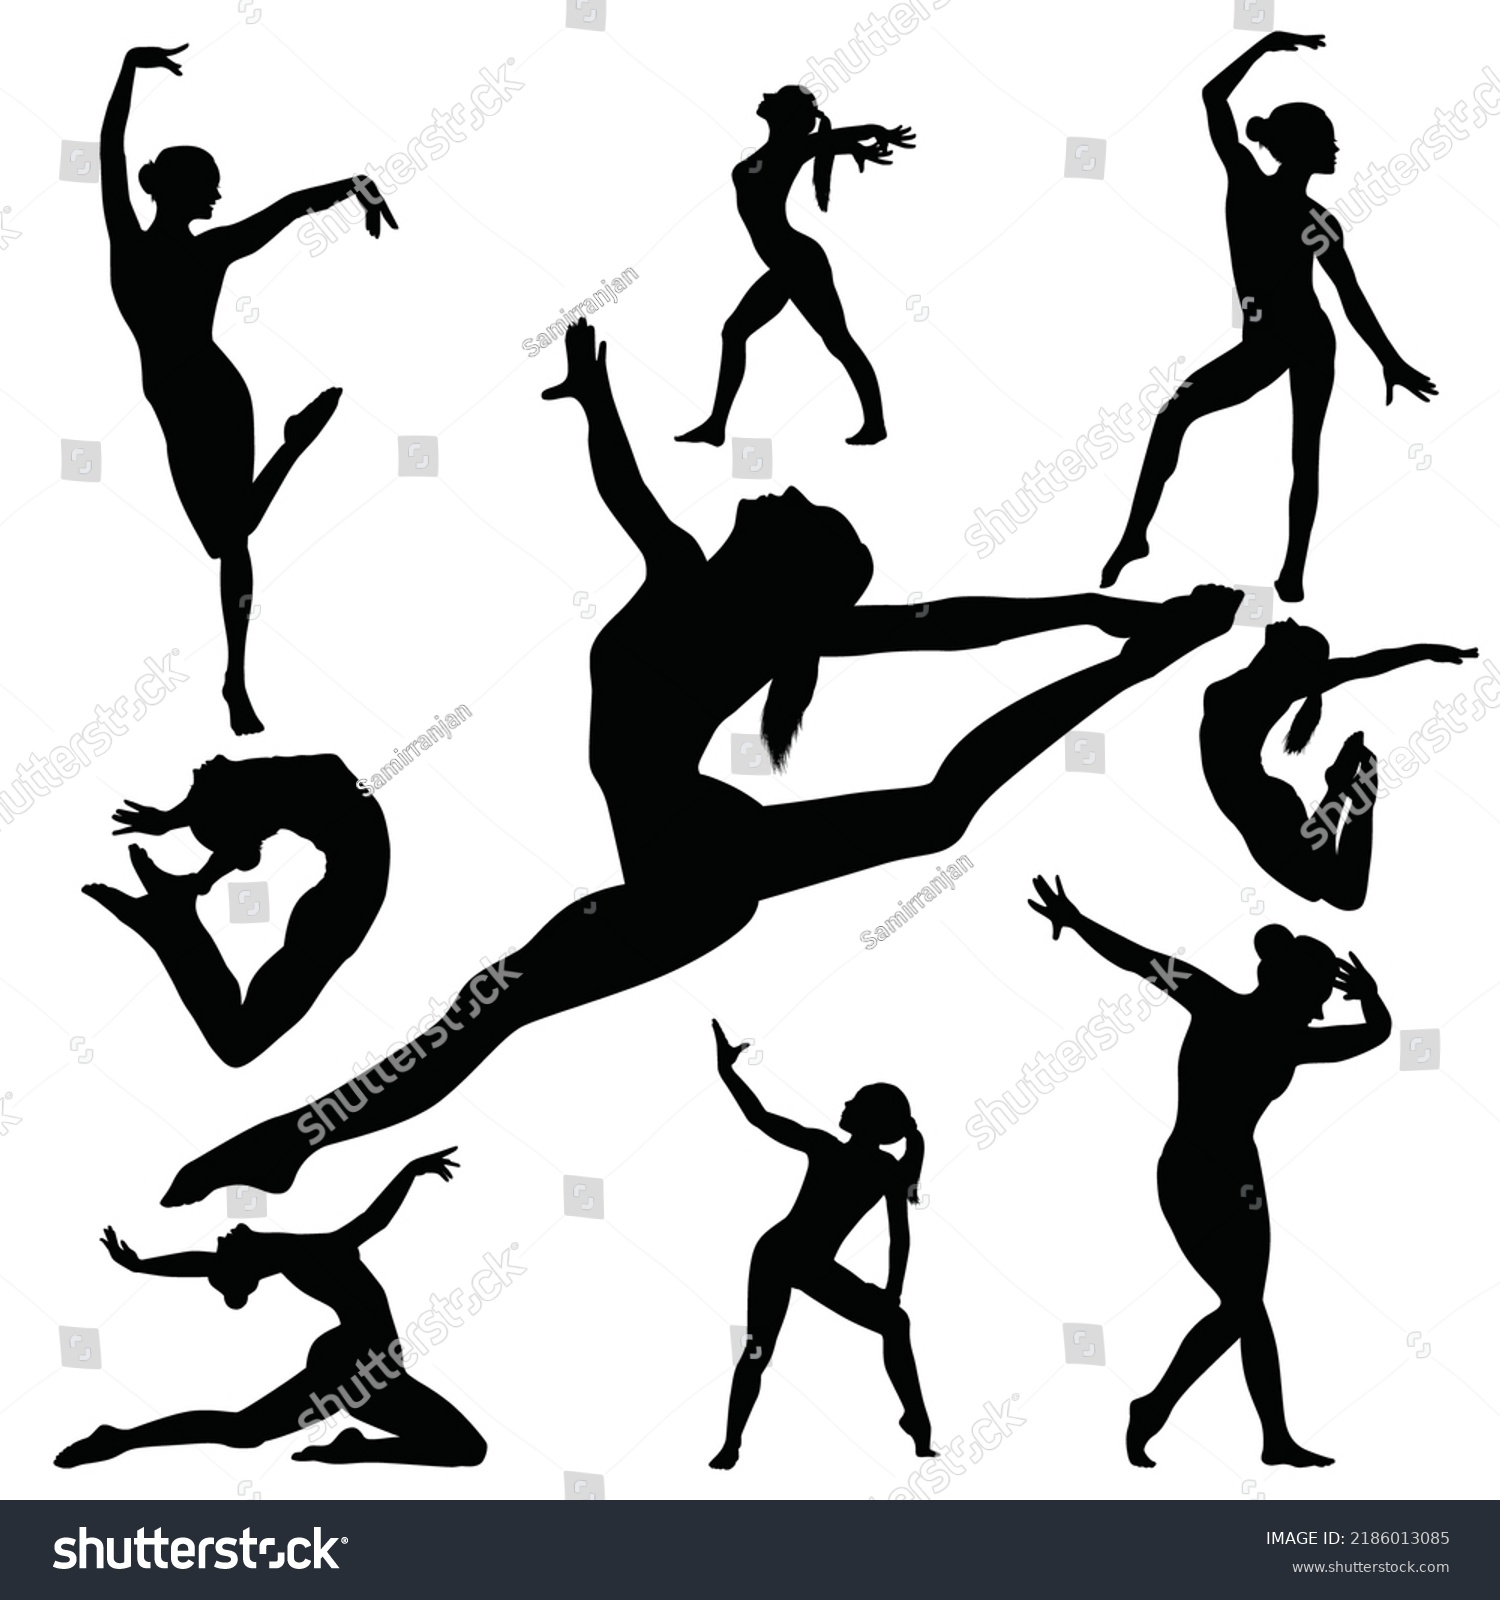 Vector Illustration Girls Gymnastic Poses Silhouettes Stock Vector Royalty Free 2186013085